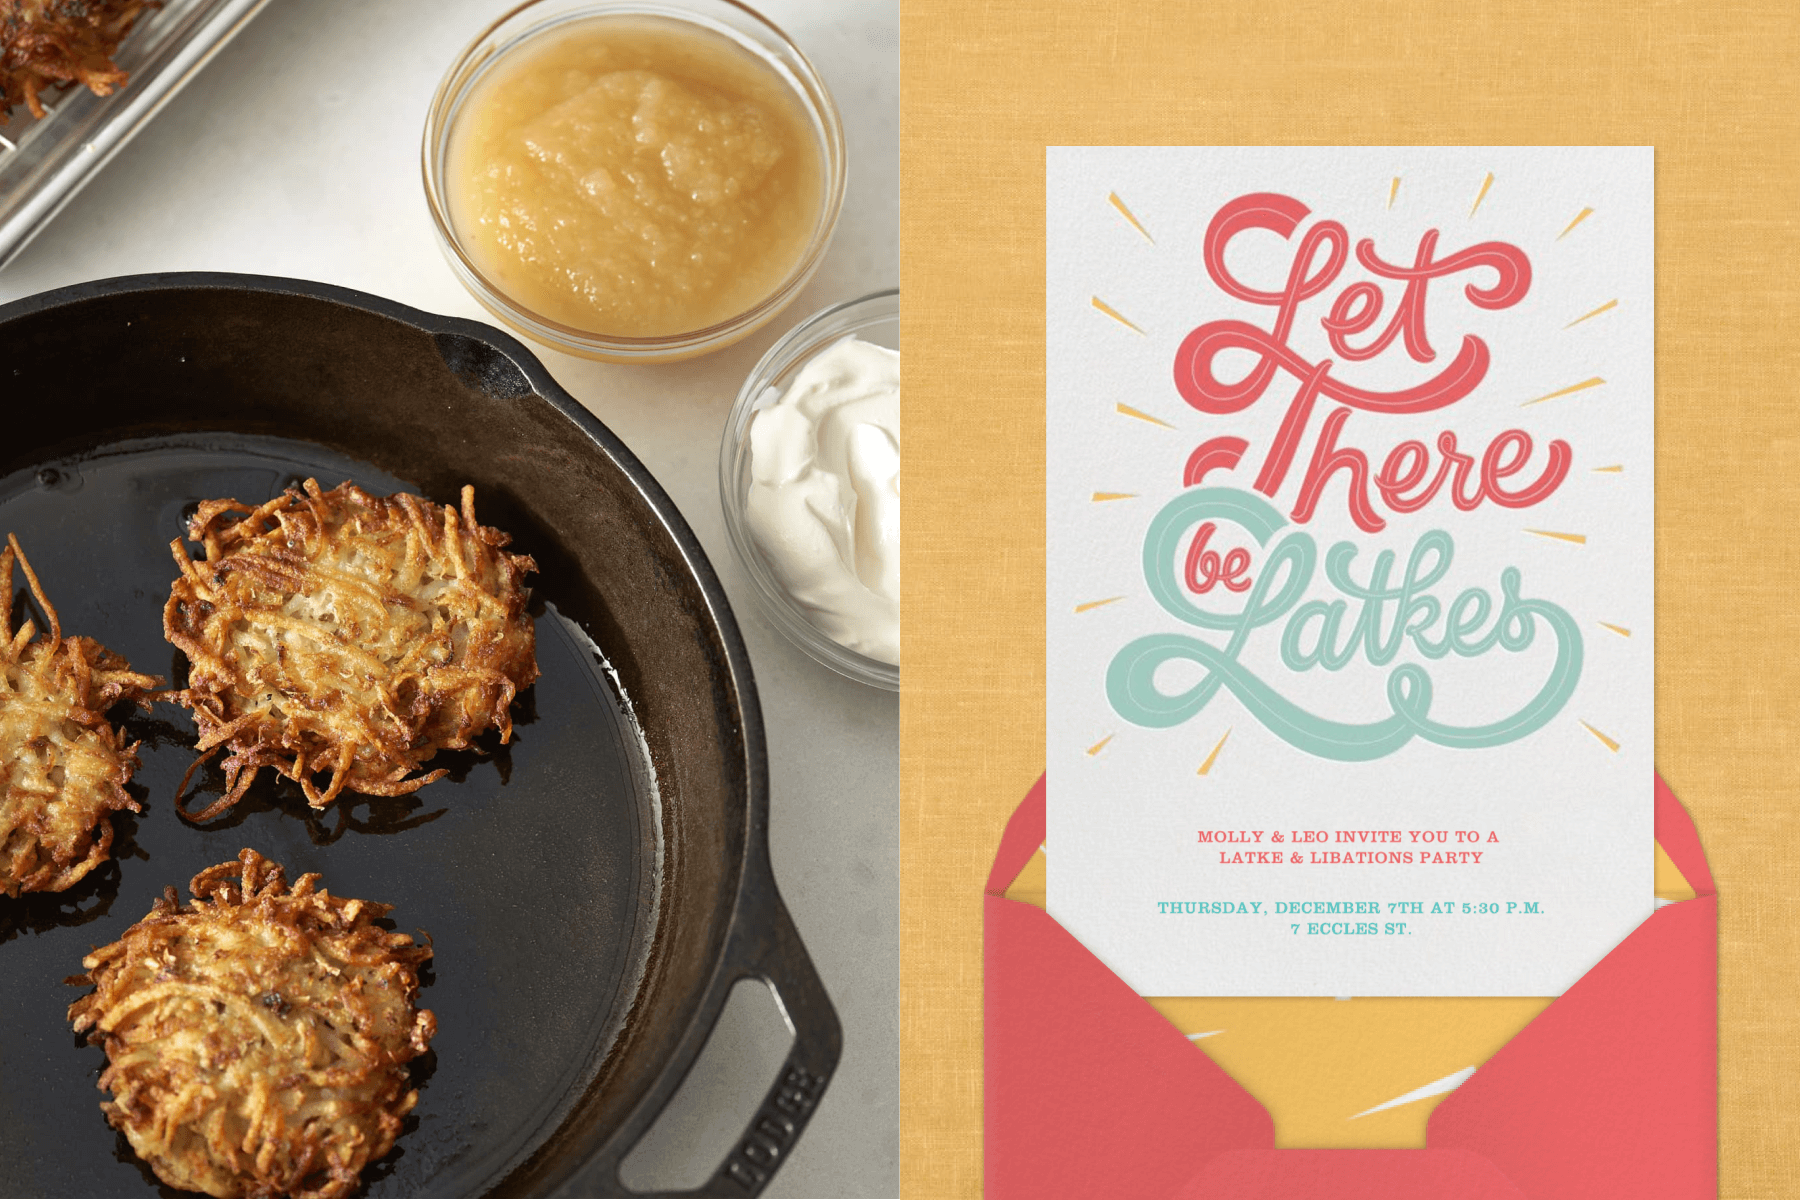 Left: Latkes on a frying pan. Right: A white Hanukkah invitation and red envelope.